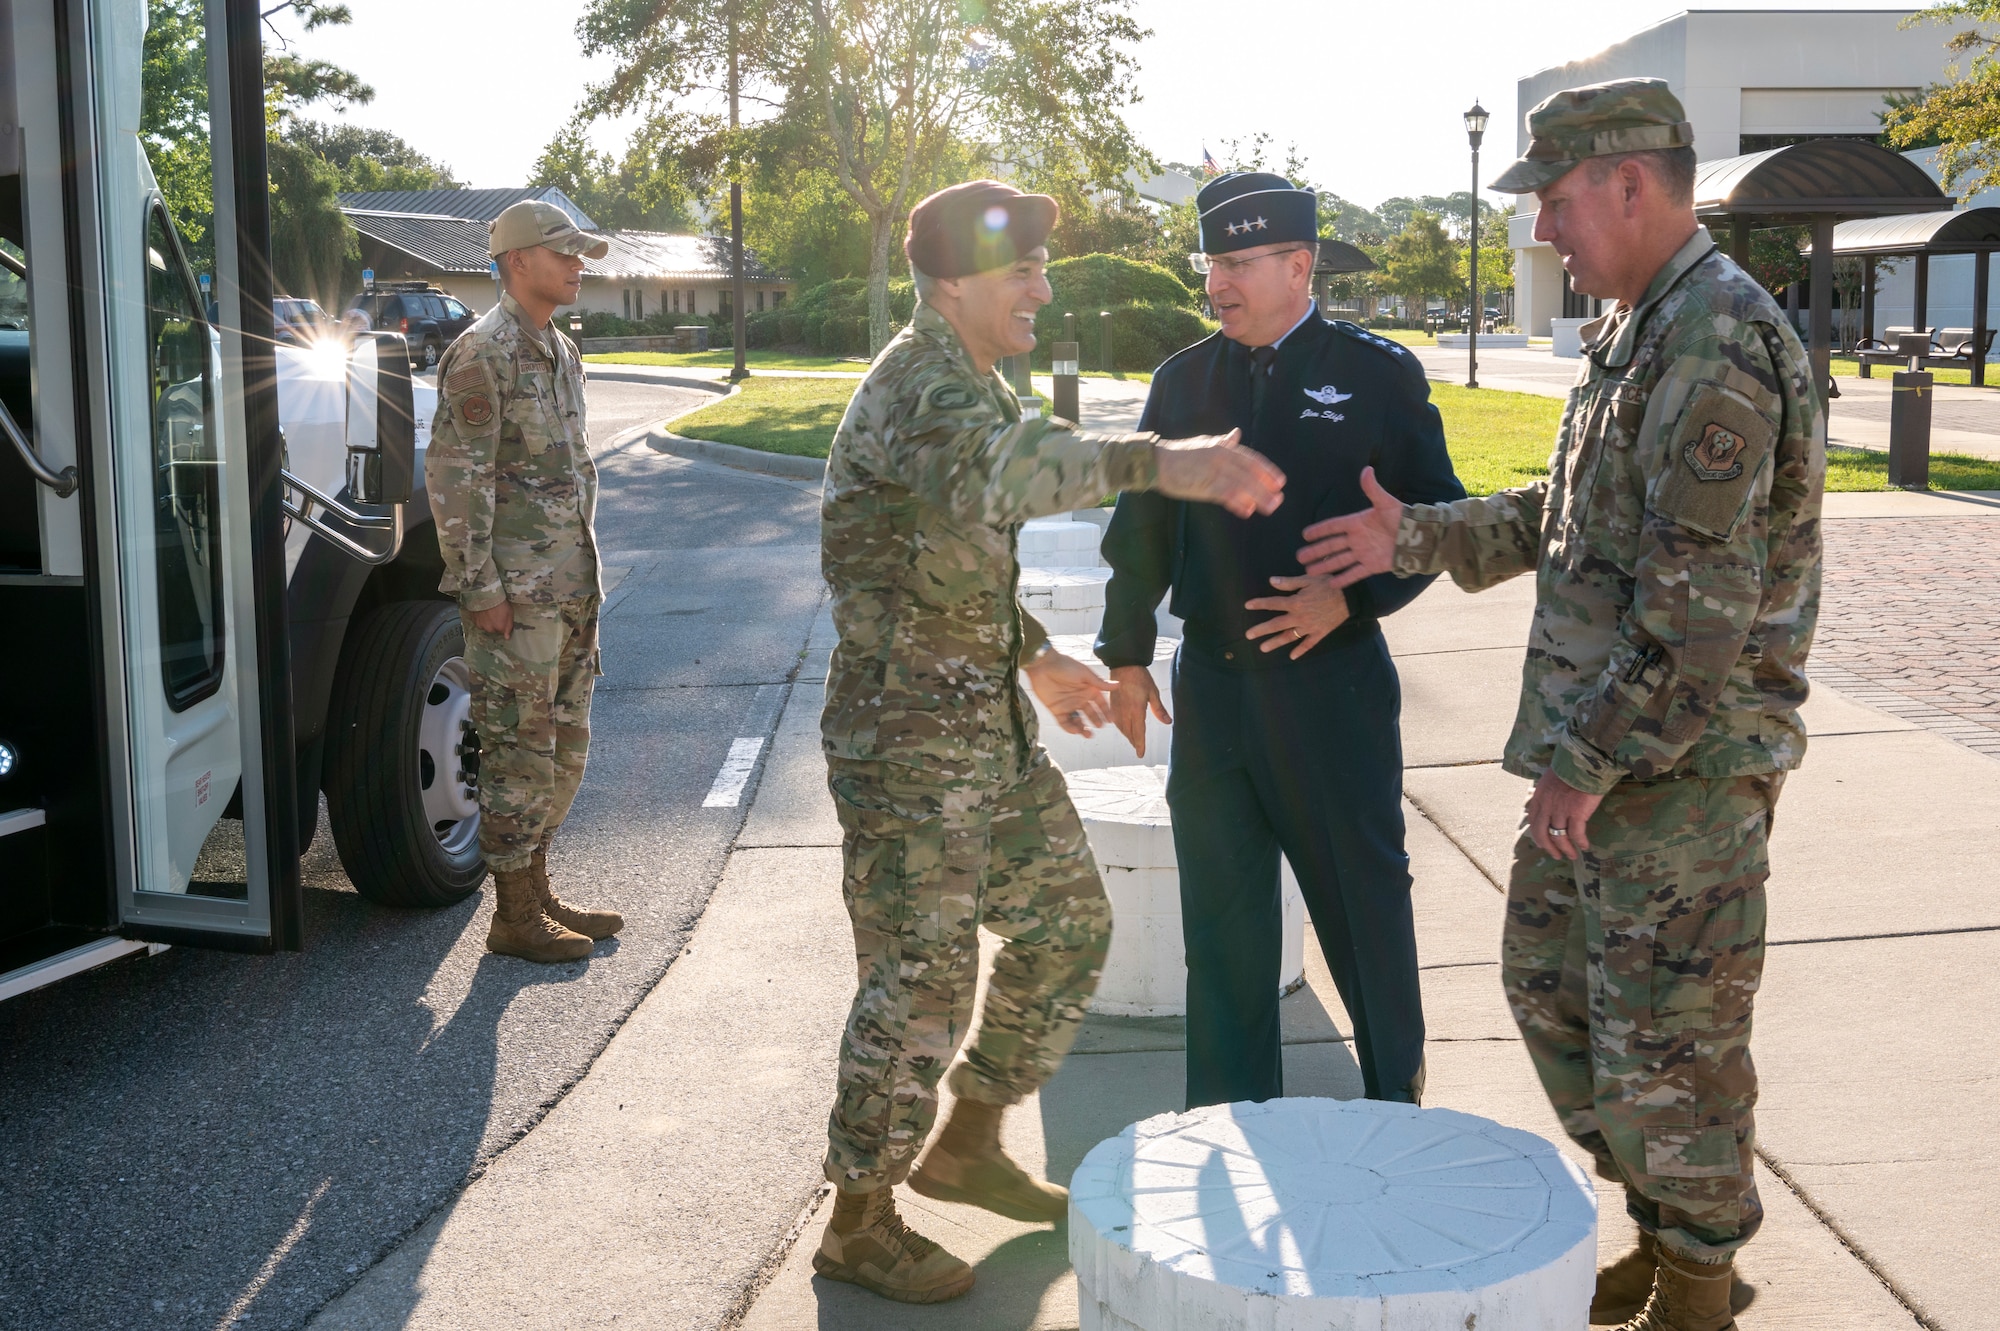 SEAC Ramón Colón-López, Senior Enlisted Advisor to the Chairman of the Joint Chiefs of Staff, is greeted by U.S. Air Force Lt. Gen. Jim Slife, Air Force Special Operations Command commander, and U.S. Air Force Chief Master Sgt. Cory Olson, AFSOC command chief, Aug. 5, 2022 at Hurlburt Field, Florida. During his visit, the SEAC attended the Talon 13 Memorial, visited AFSOC Headquarters and the 24th Special Operations Wing, had lunch with Airmen, and hosted an All-Call. The SEAC serves as the 4th Senior Enlisted Advisor to the Chairman of the Joint Chiefs of Staff, the most senior enlisted service member, by position, in the United States Armed Forces, and the principal military advisor to the Chairman on all matters involving joint and combined total force integration, utilization, health of the force, and joint development for enlisted personnel.